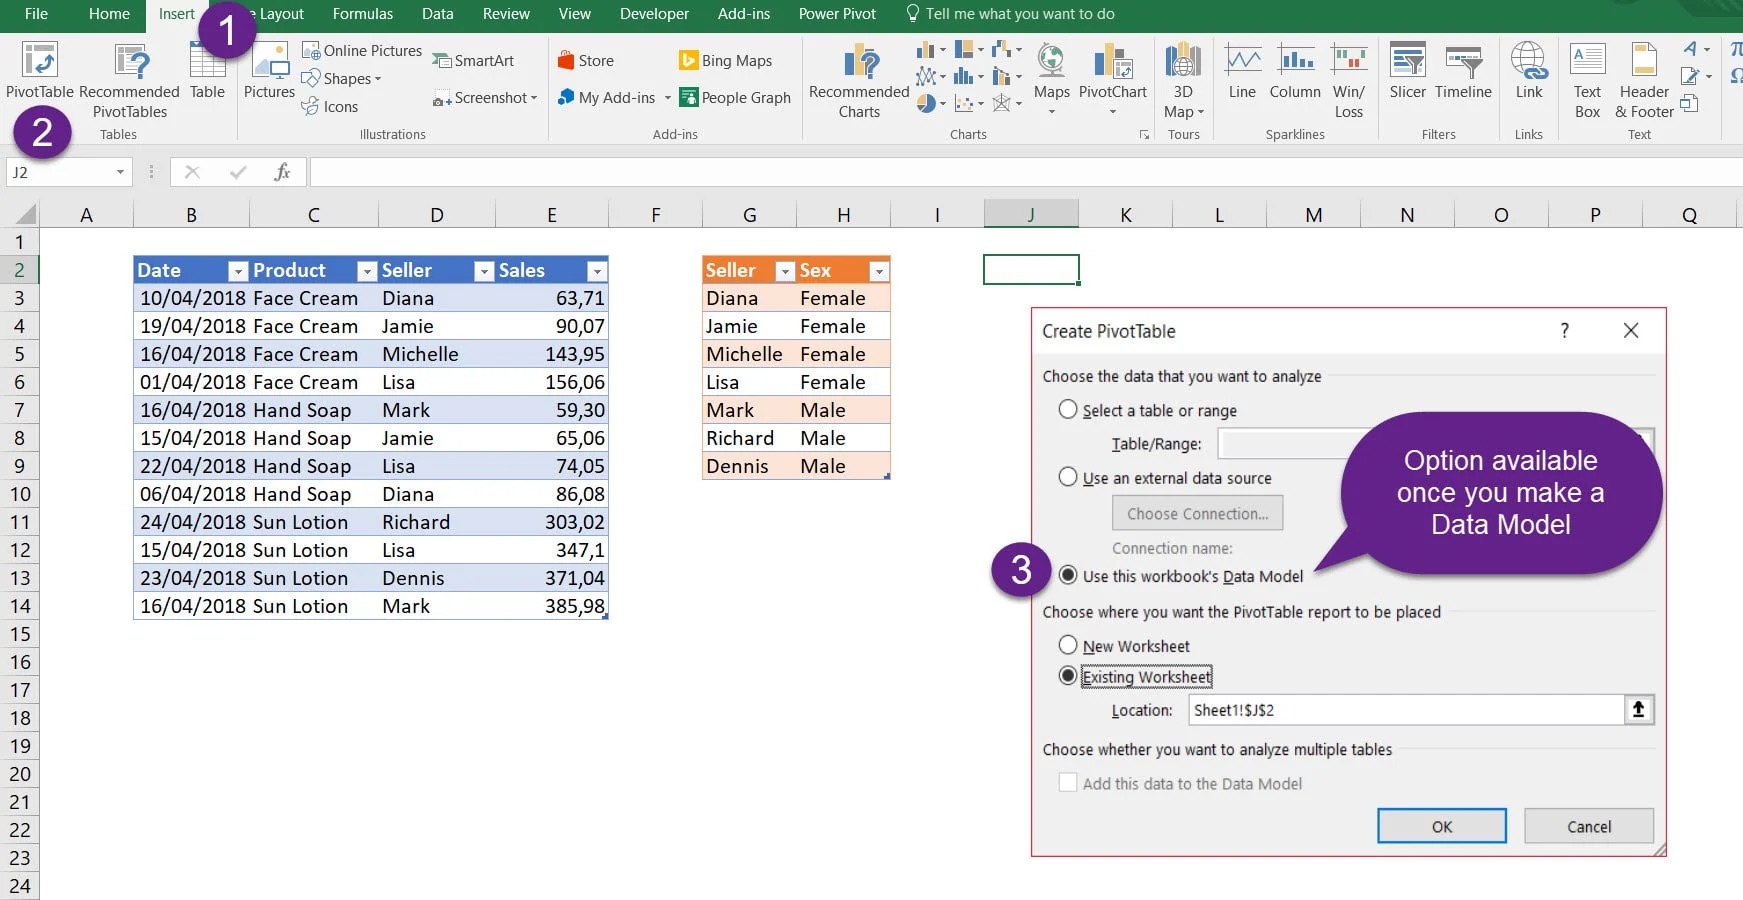 how-to-add-data-to-data-model-in-excel